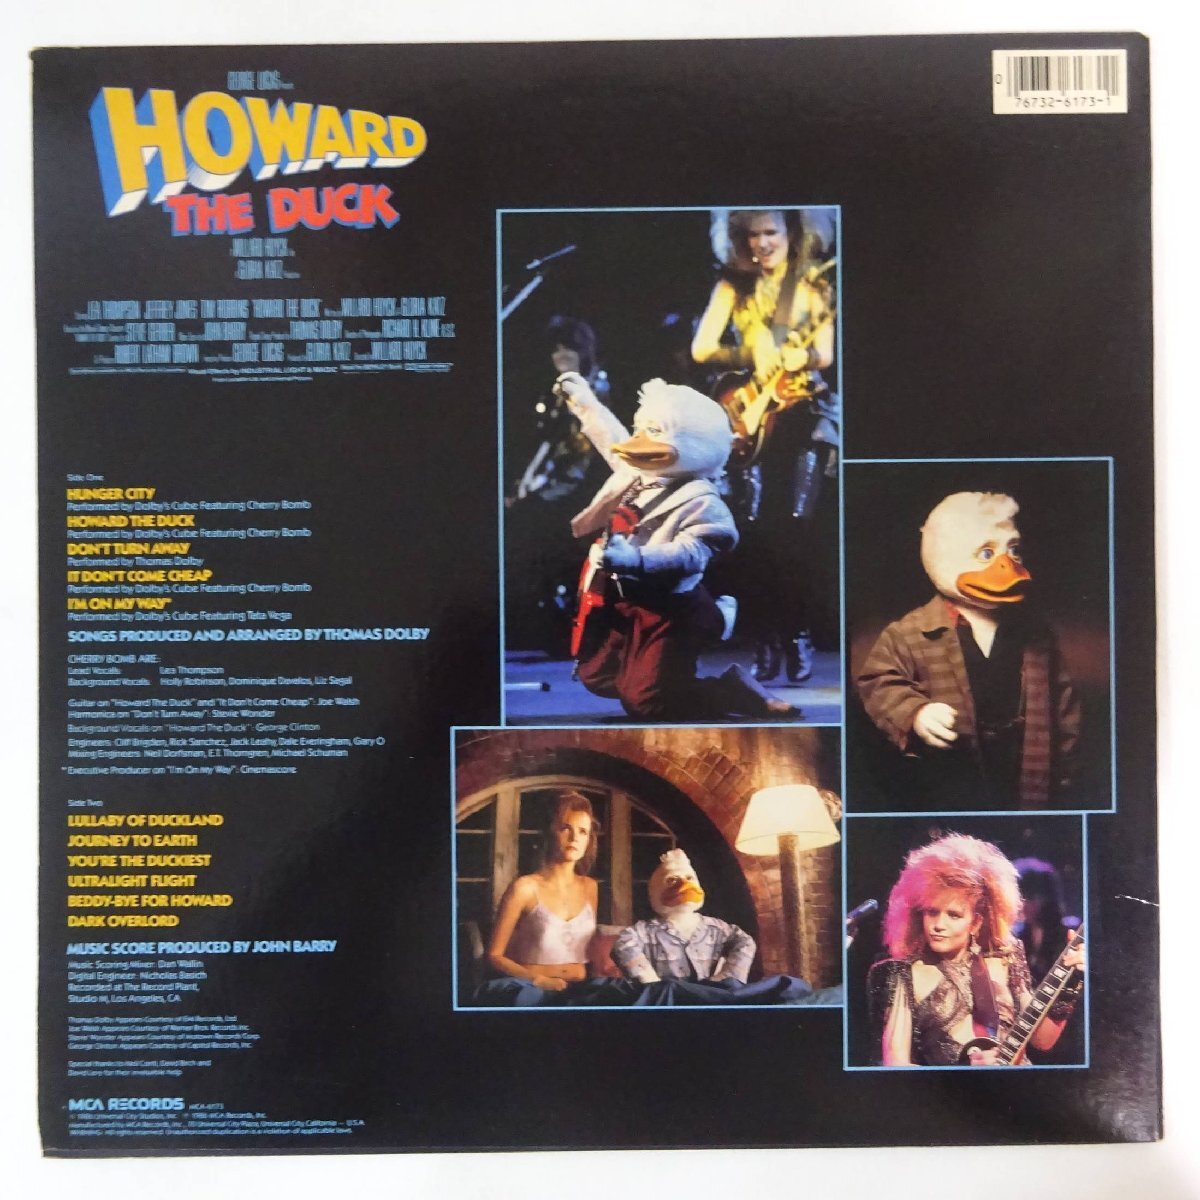 11183267;[US record ]John Barry / Howard The Duck darkness Devil Kings. conspiracy 